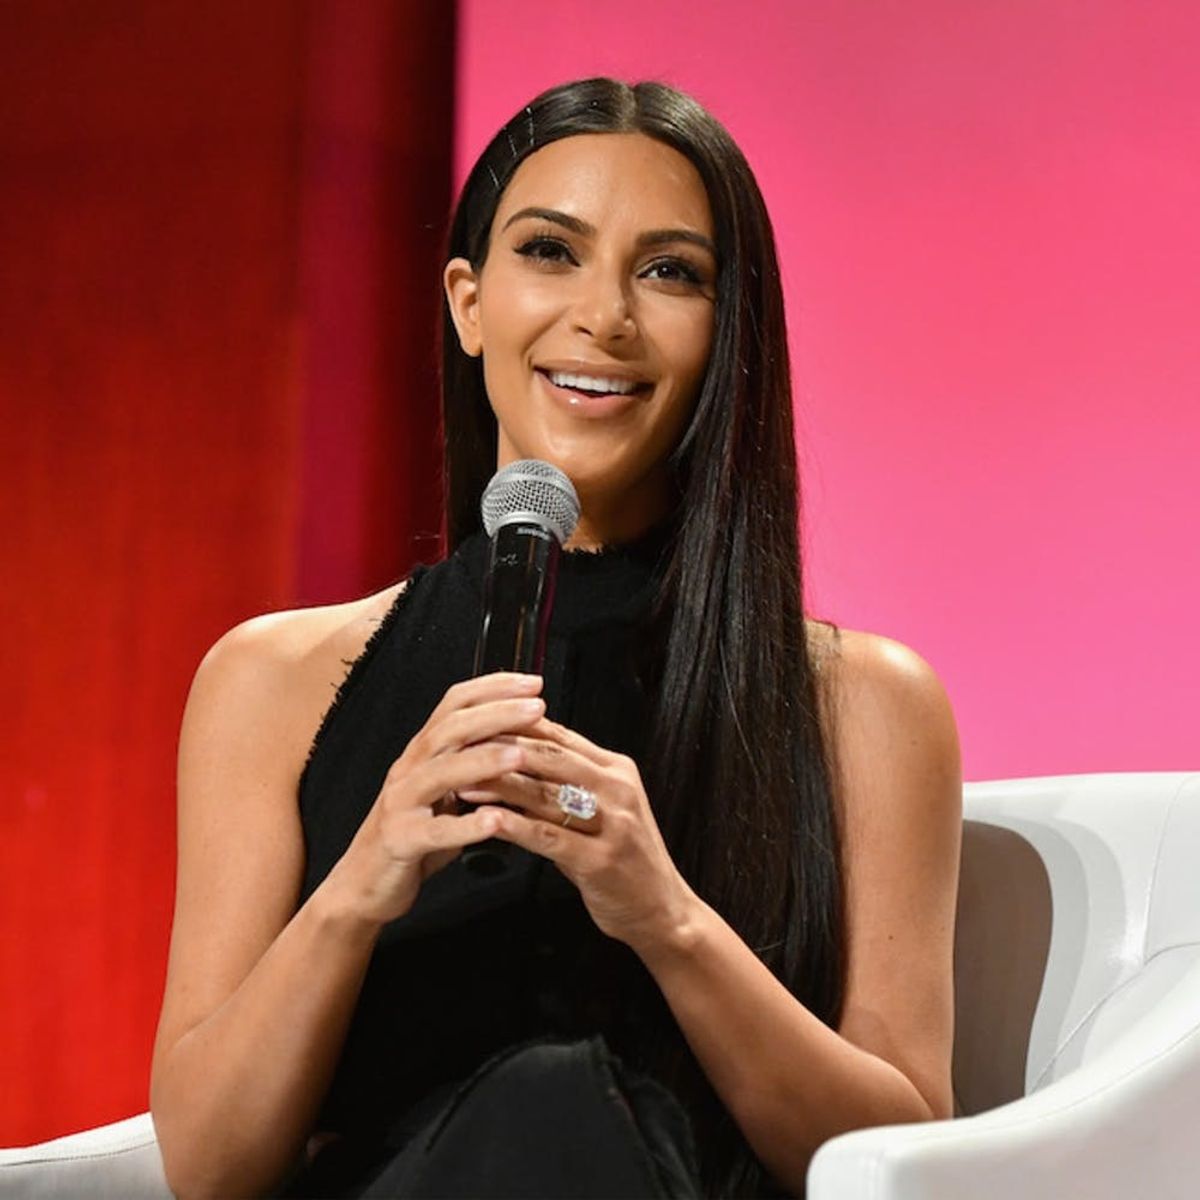 Here’s How and Why Kim Kardashian Got Help for Her Anxiety